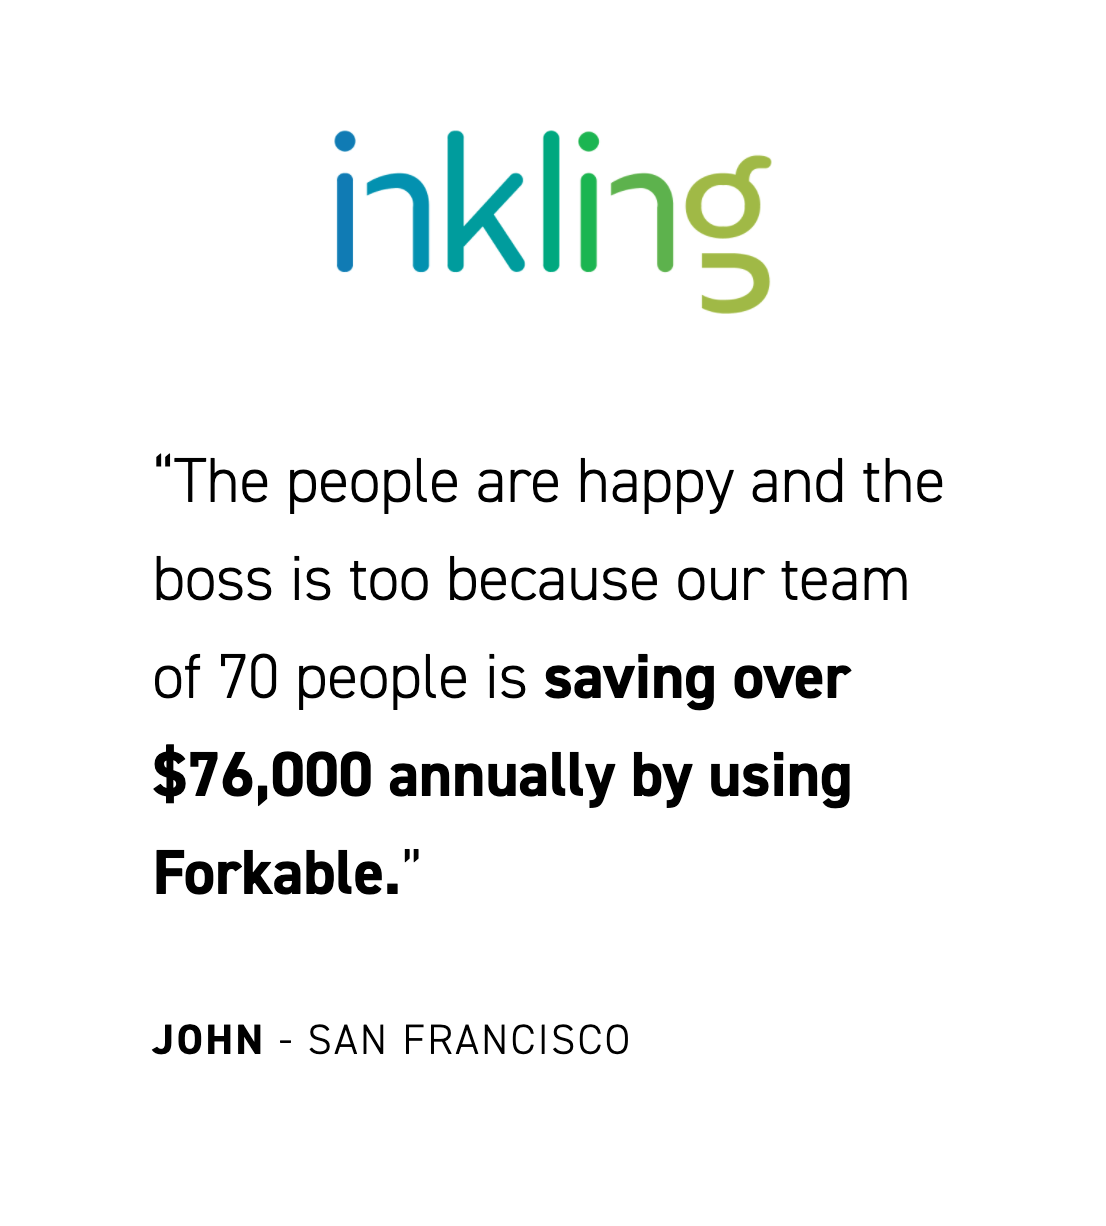 Here’s how one company is saving $76,000 annually with Forkable.